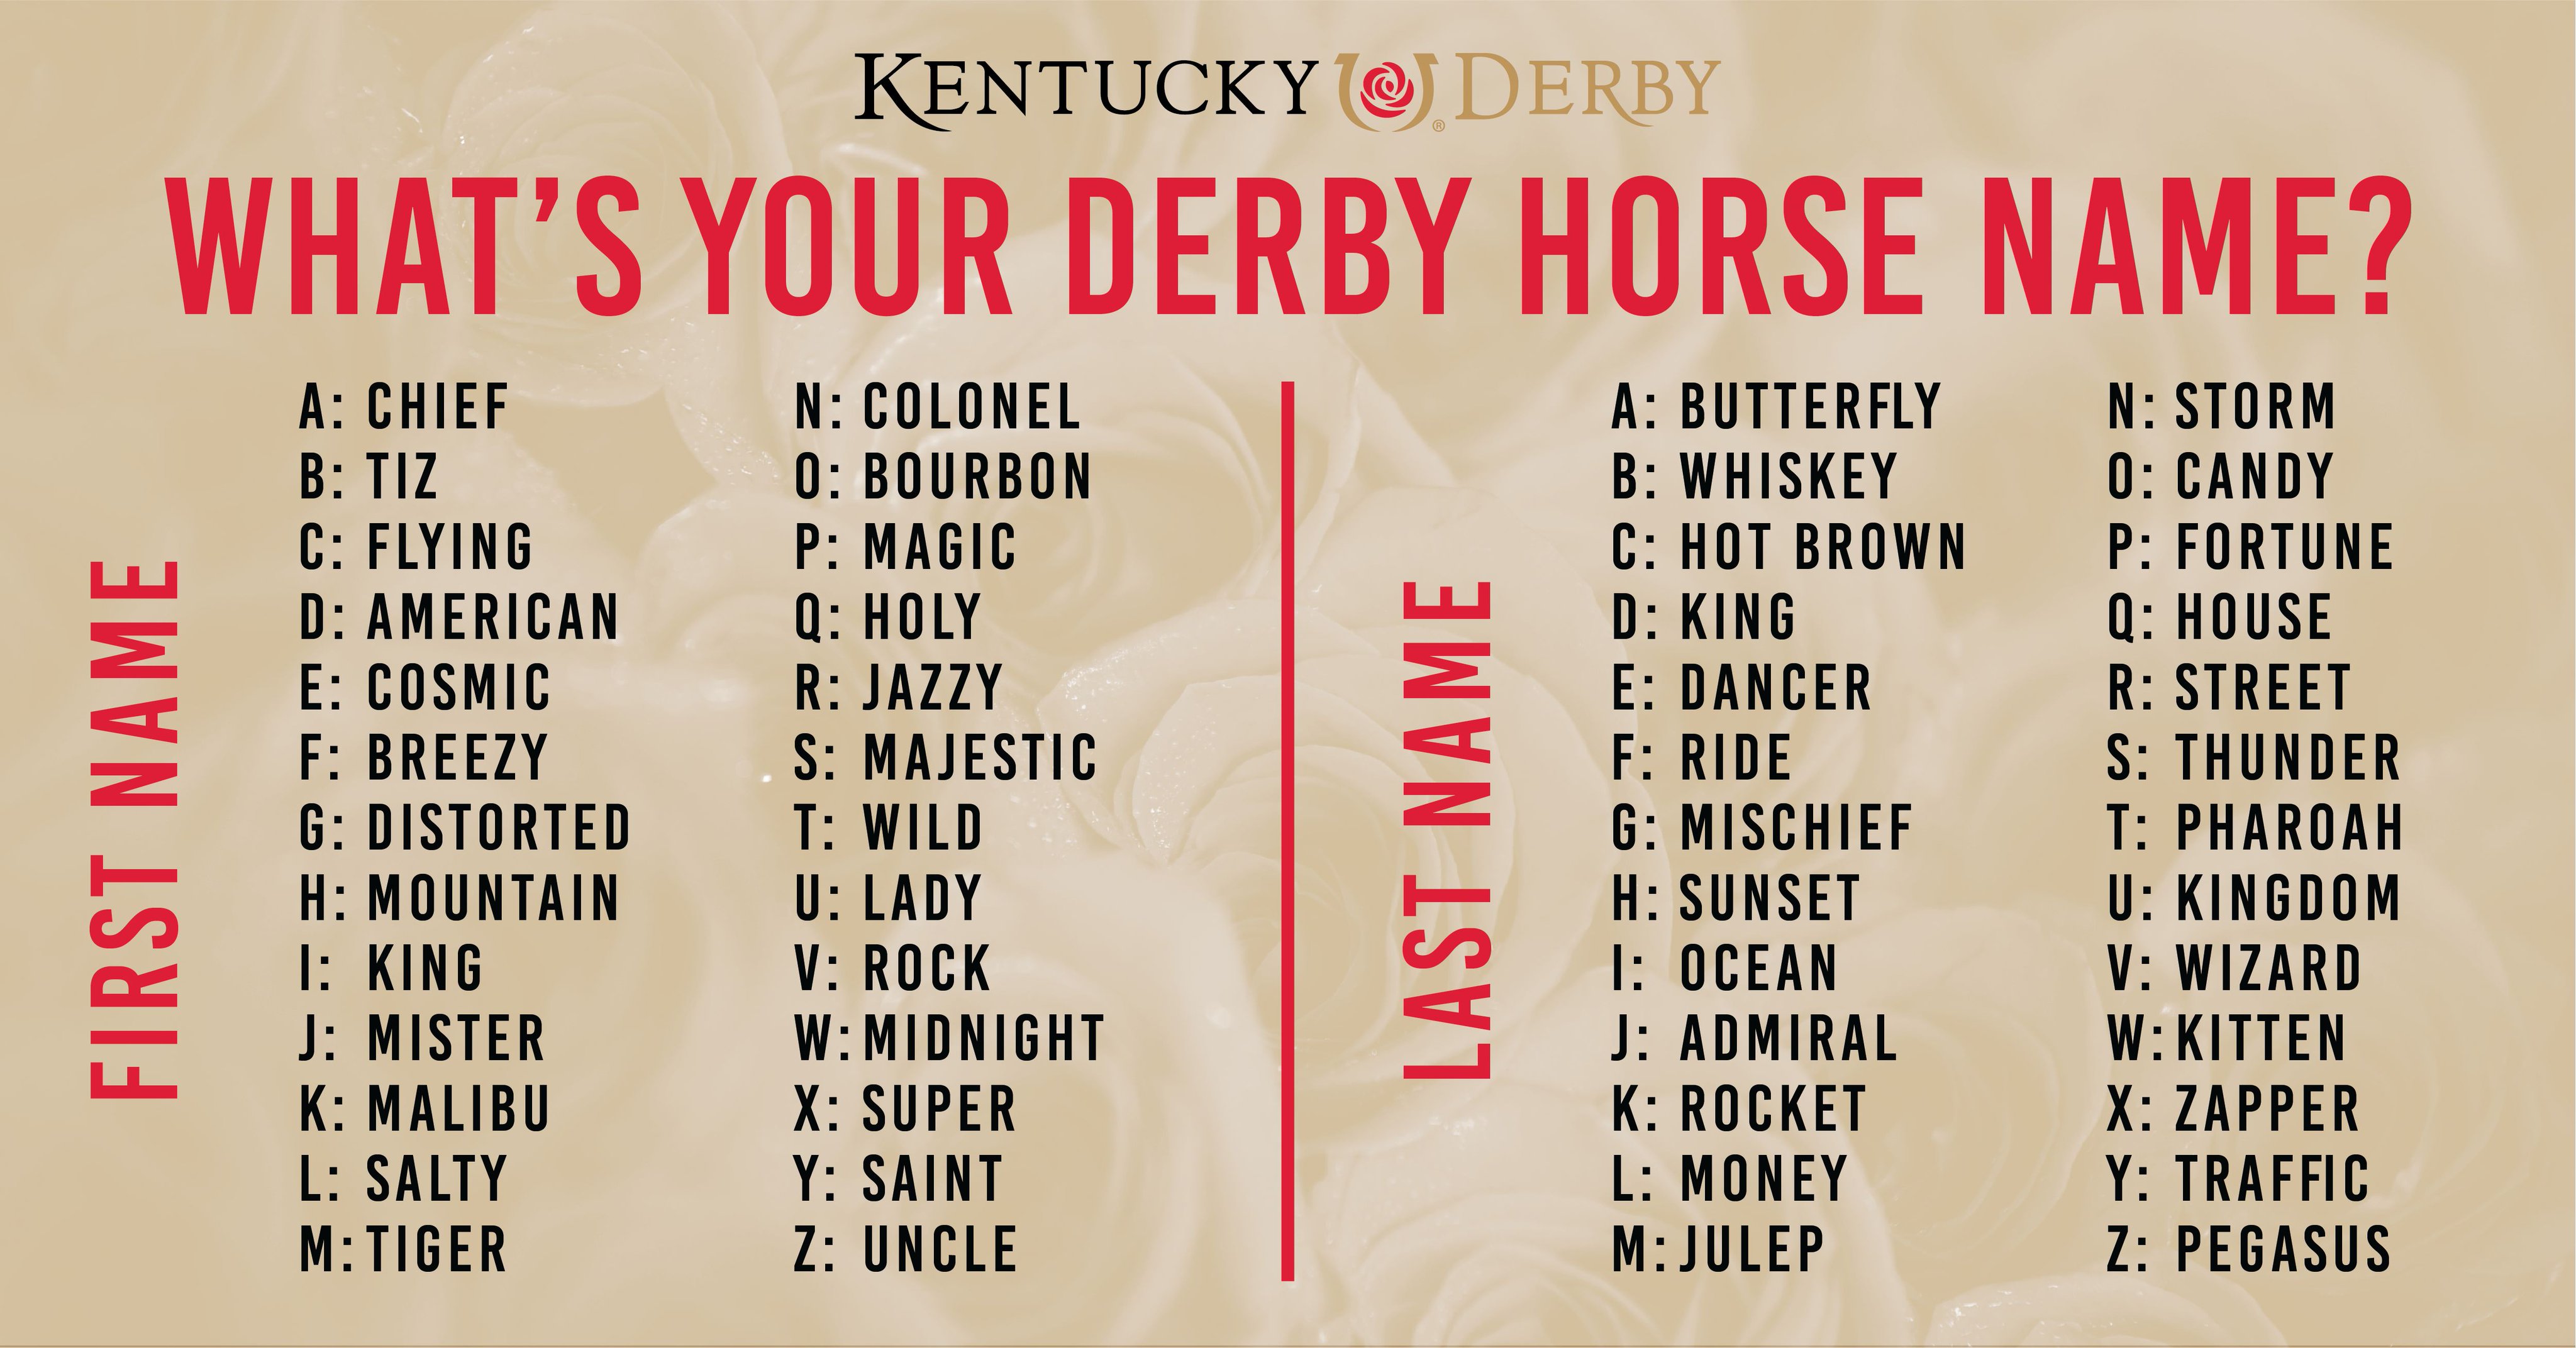 Kentucky Derby What S Your Kyderby Horse Name T Co Bzlit7nykl Twitter